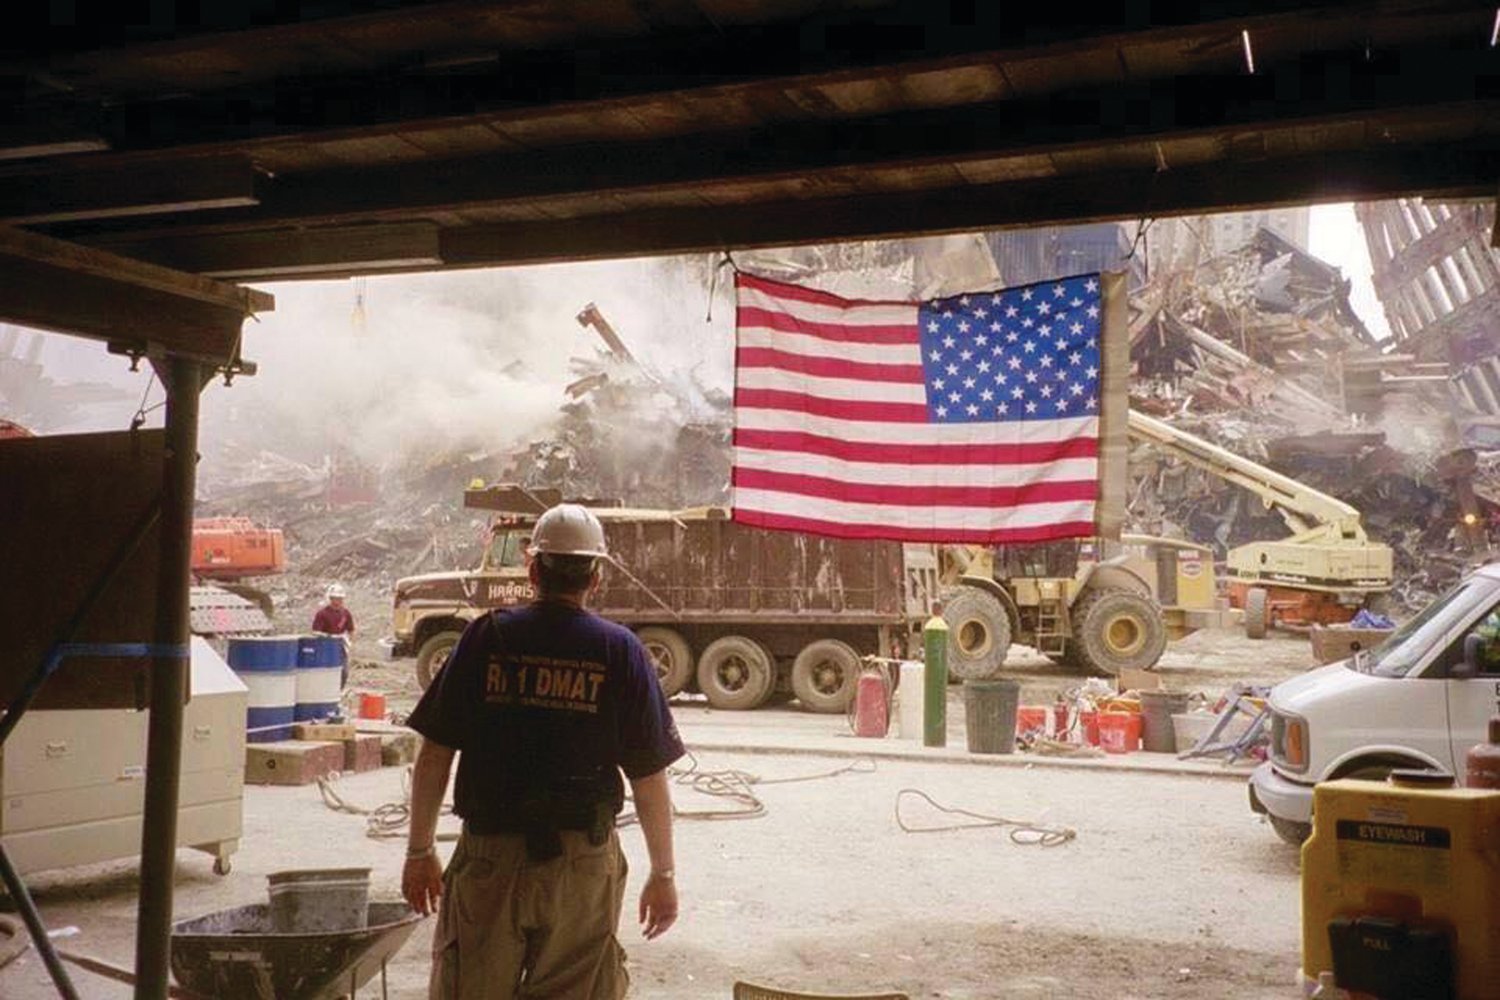 AT GROUND ZERO: A member of the Rhode Island Disaster Medical Assistance Team looks out at a portion of “the pile” at Ground Zero in Manhattan during the response to the attacks.